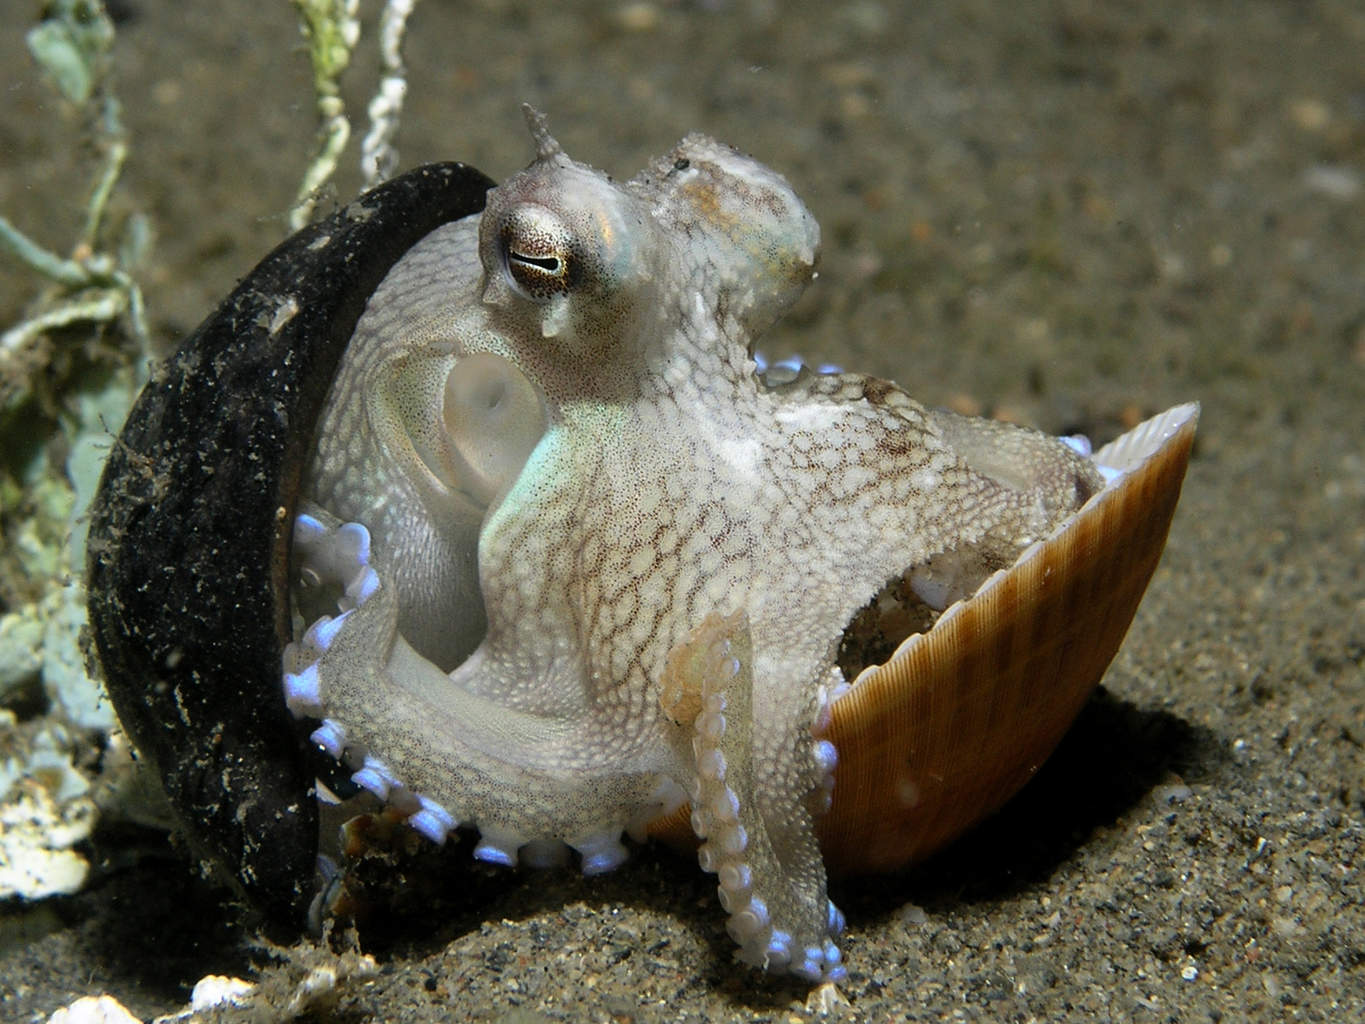 defensive tool use in octopuses